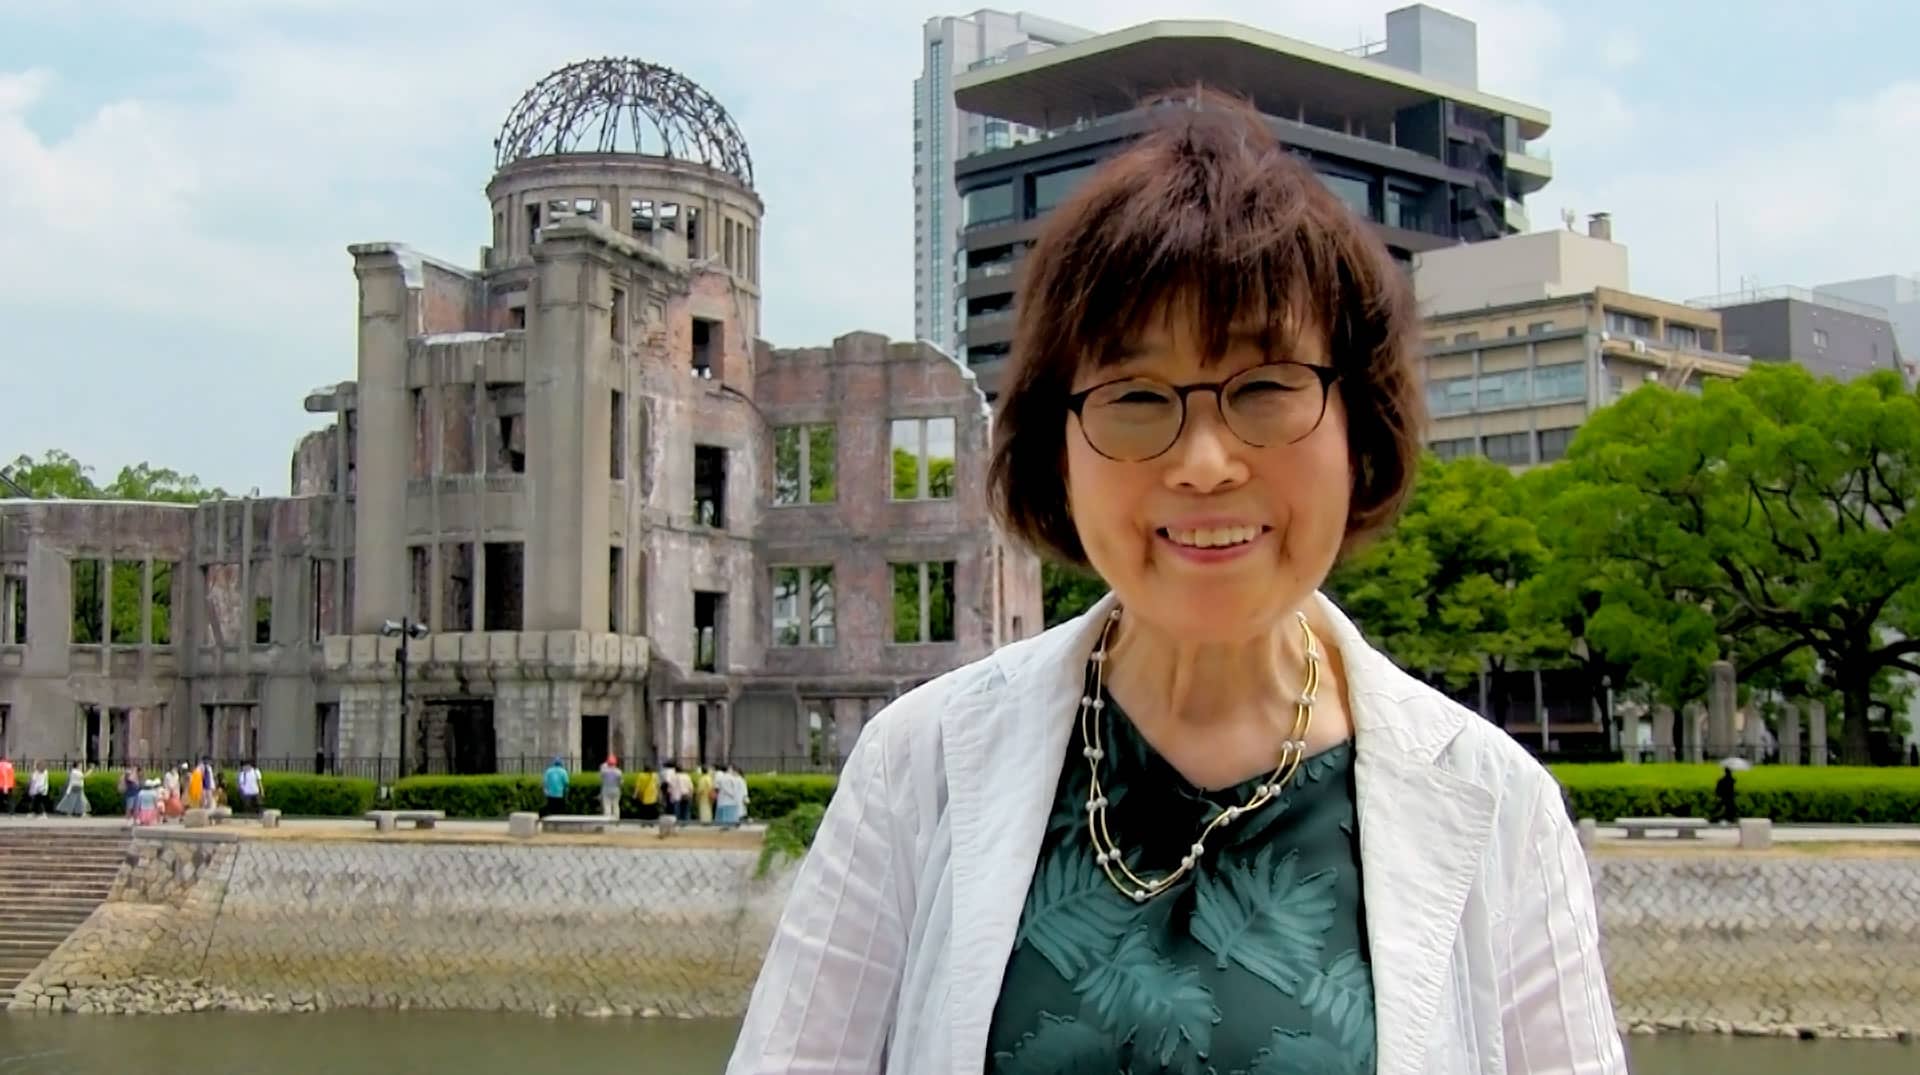 Keiko Ogura in front of the A-bomb Dome